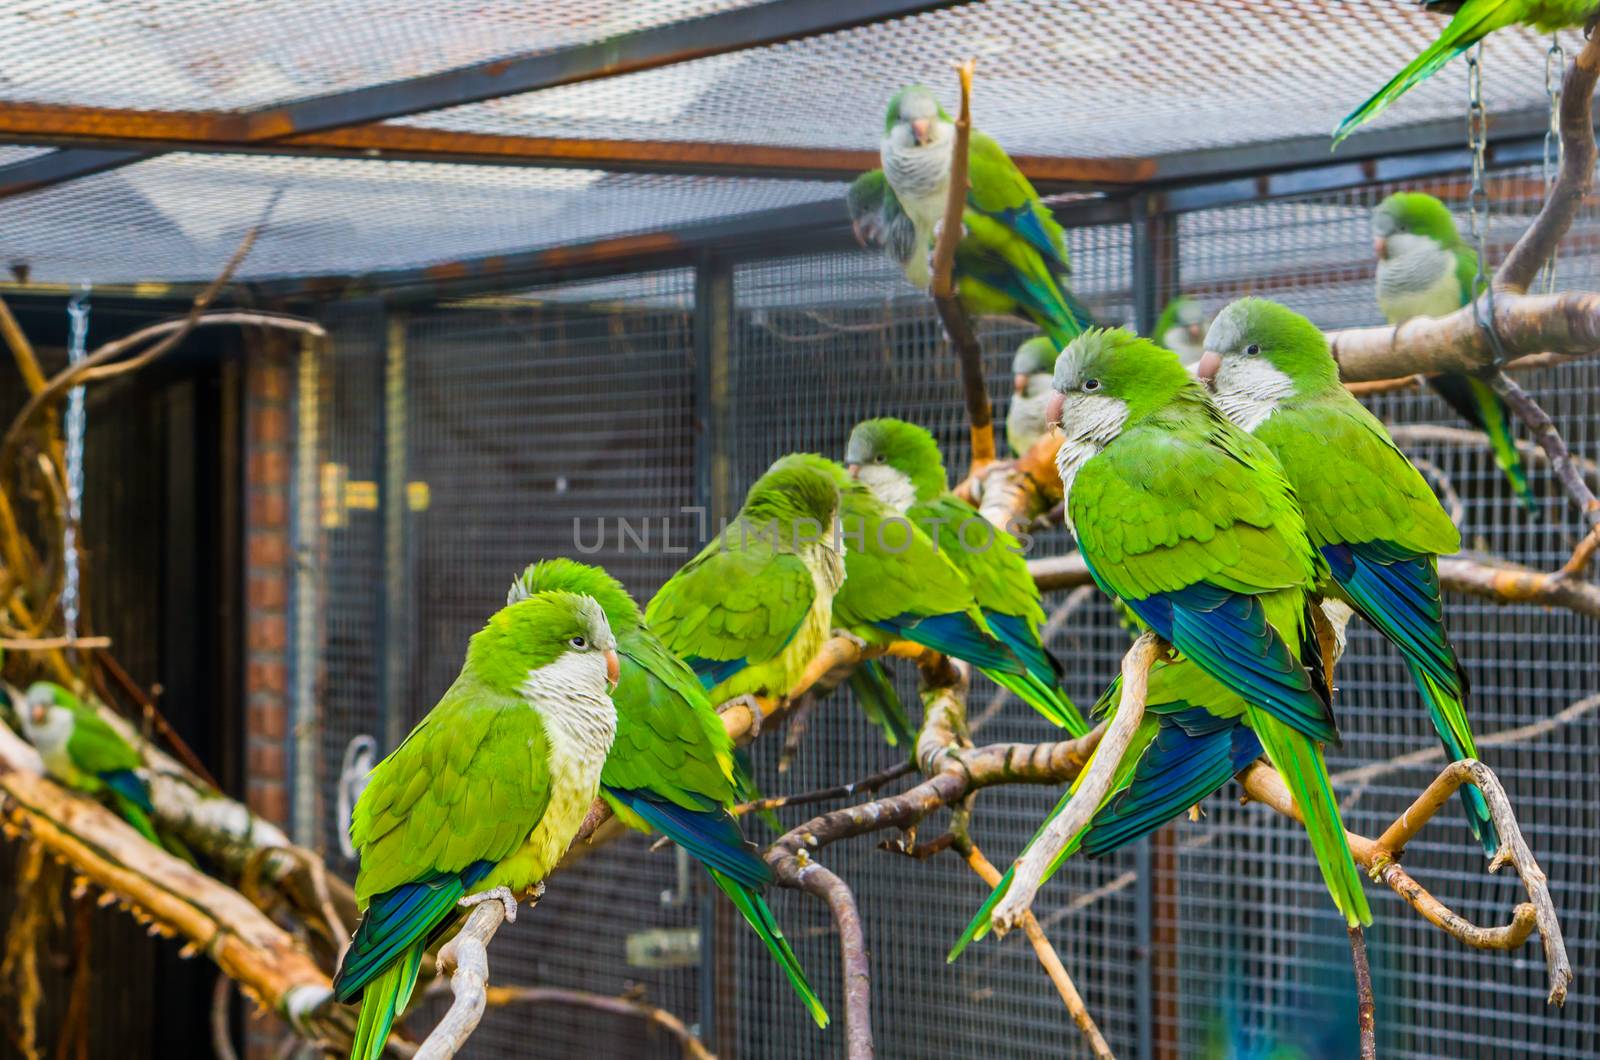 Big group of monk parakeets sitting together on a branch in the aviary, Popular pets in aviculture, tropical birds from Argentina